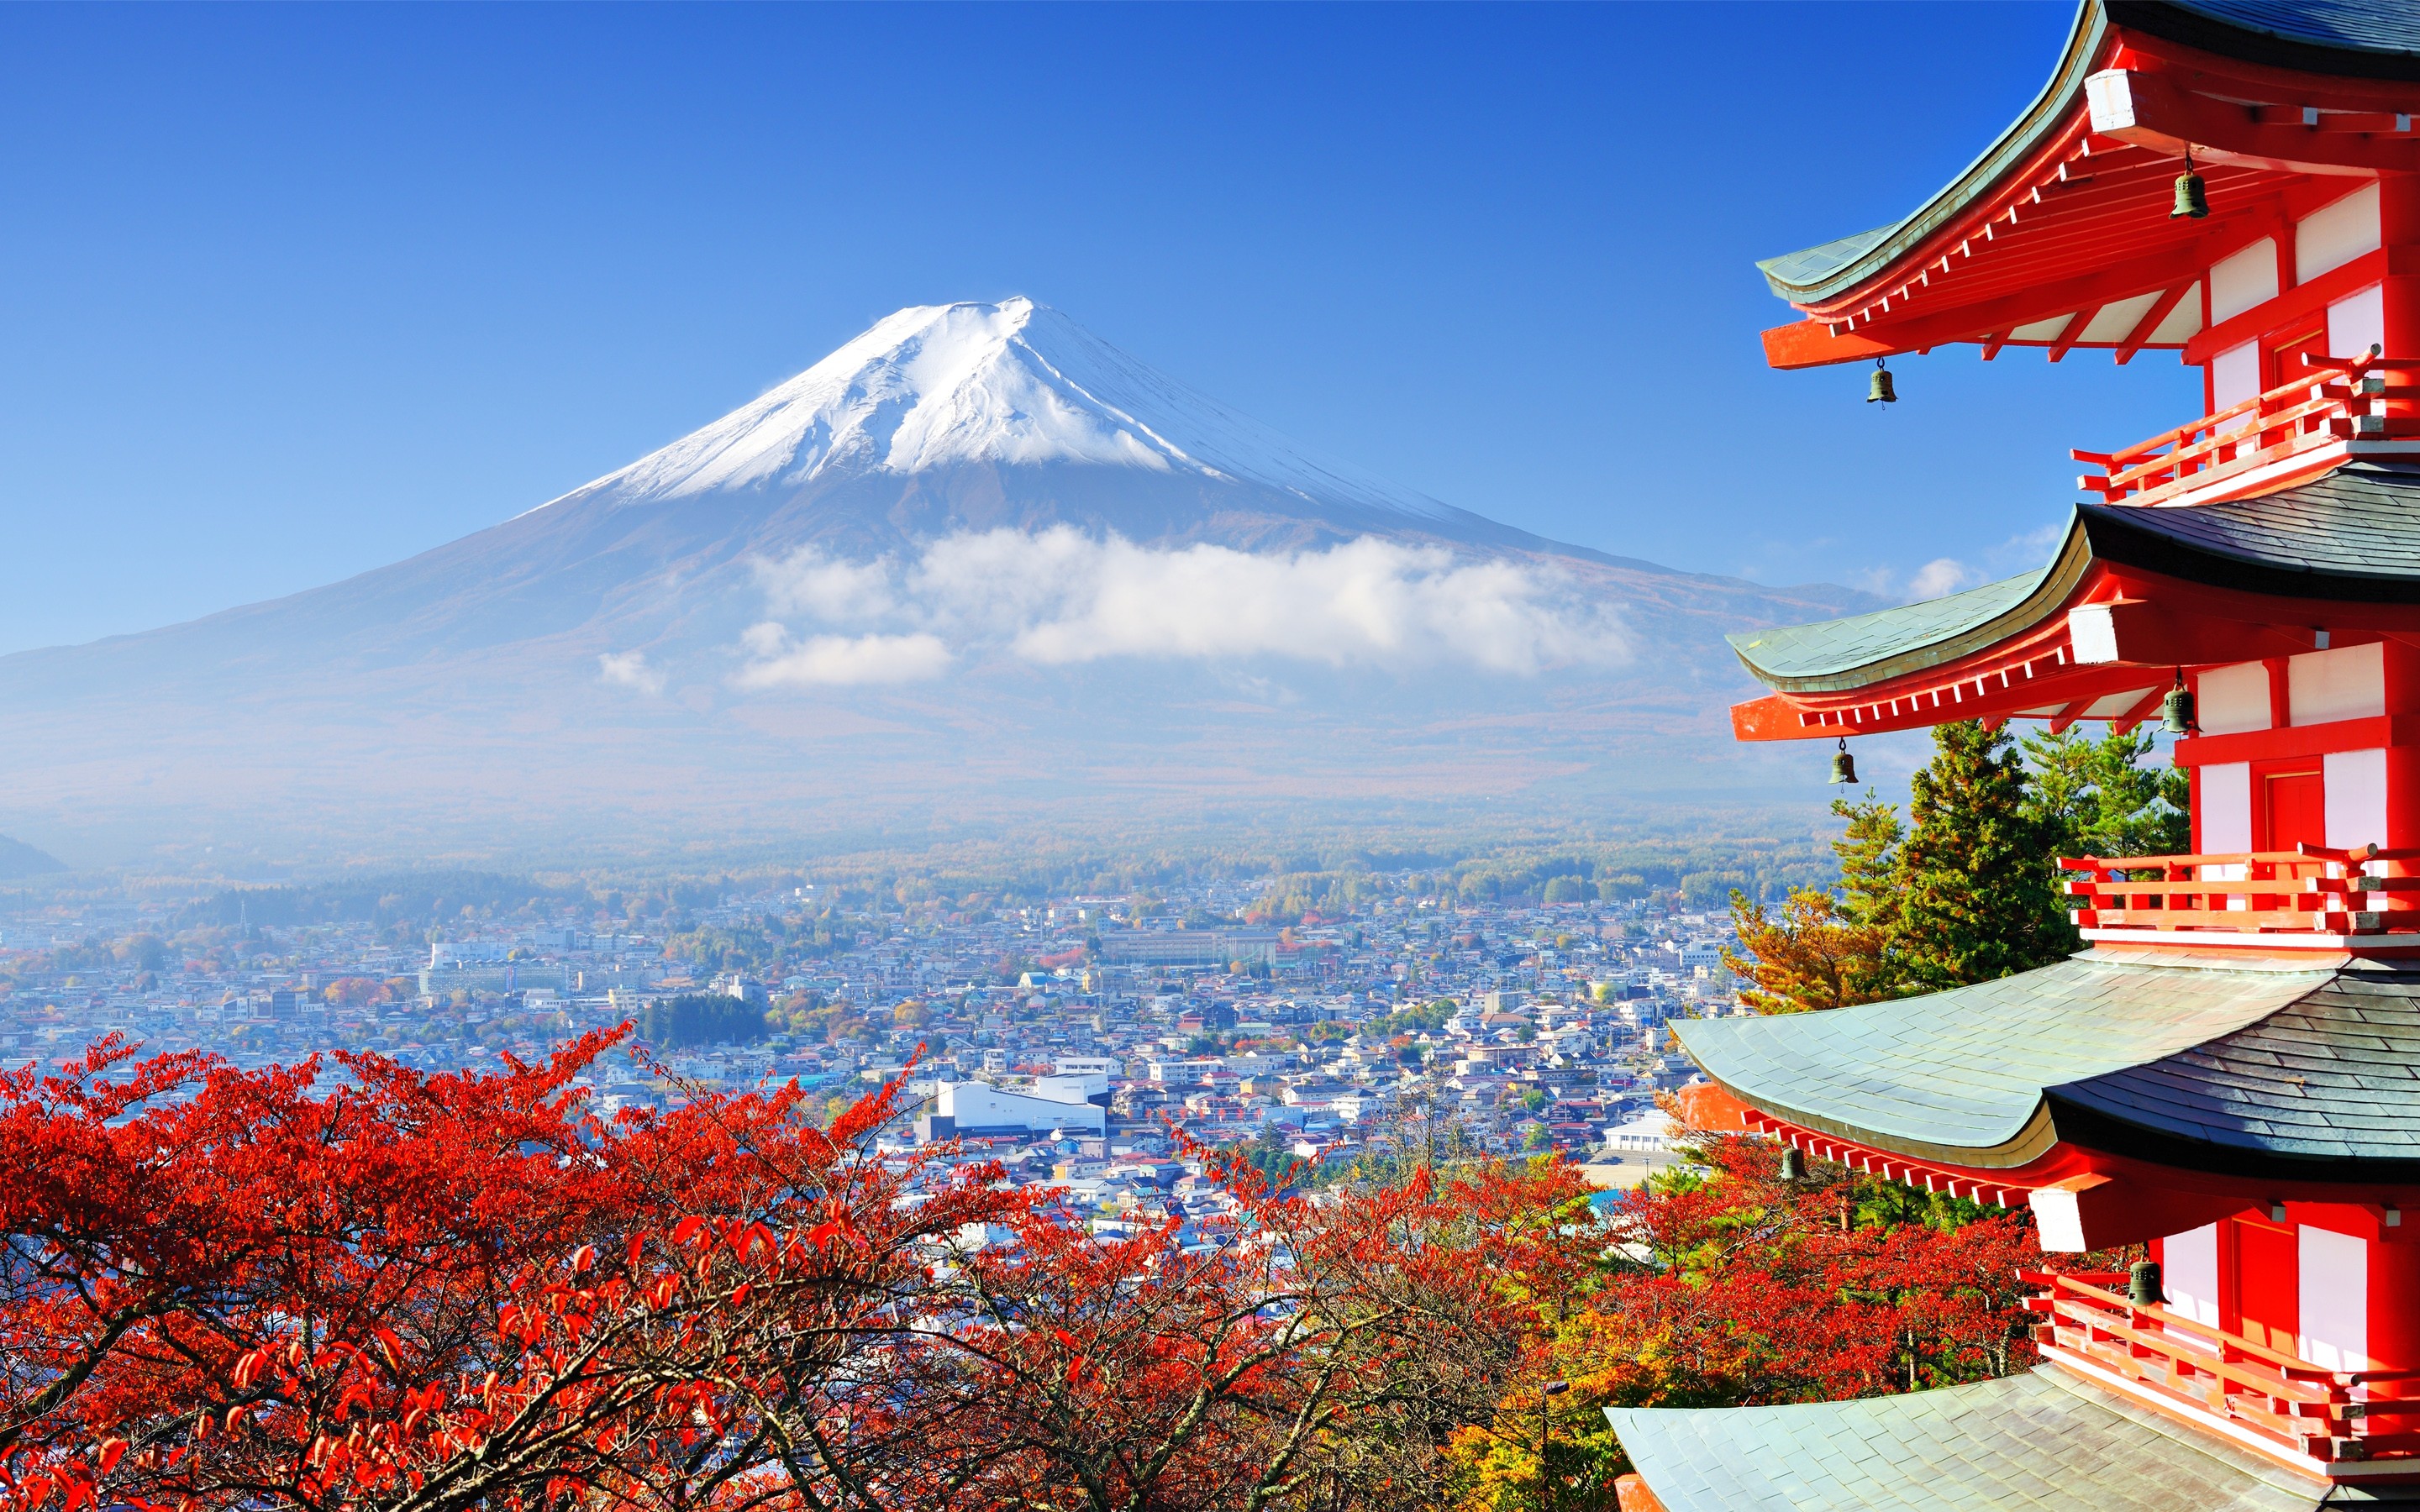 General 2880x1800 Japan mountains Mount Fuji Asian architecture building nature trees volcano cityscape outdoors snowy peak